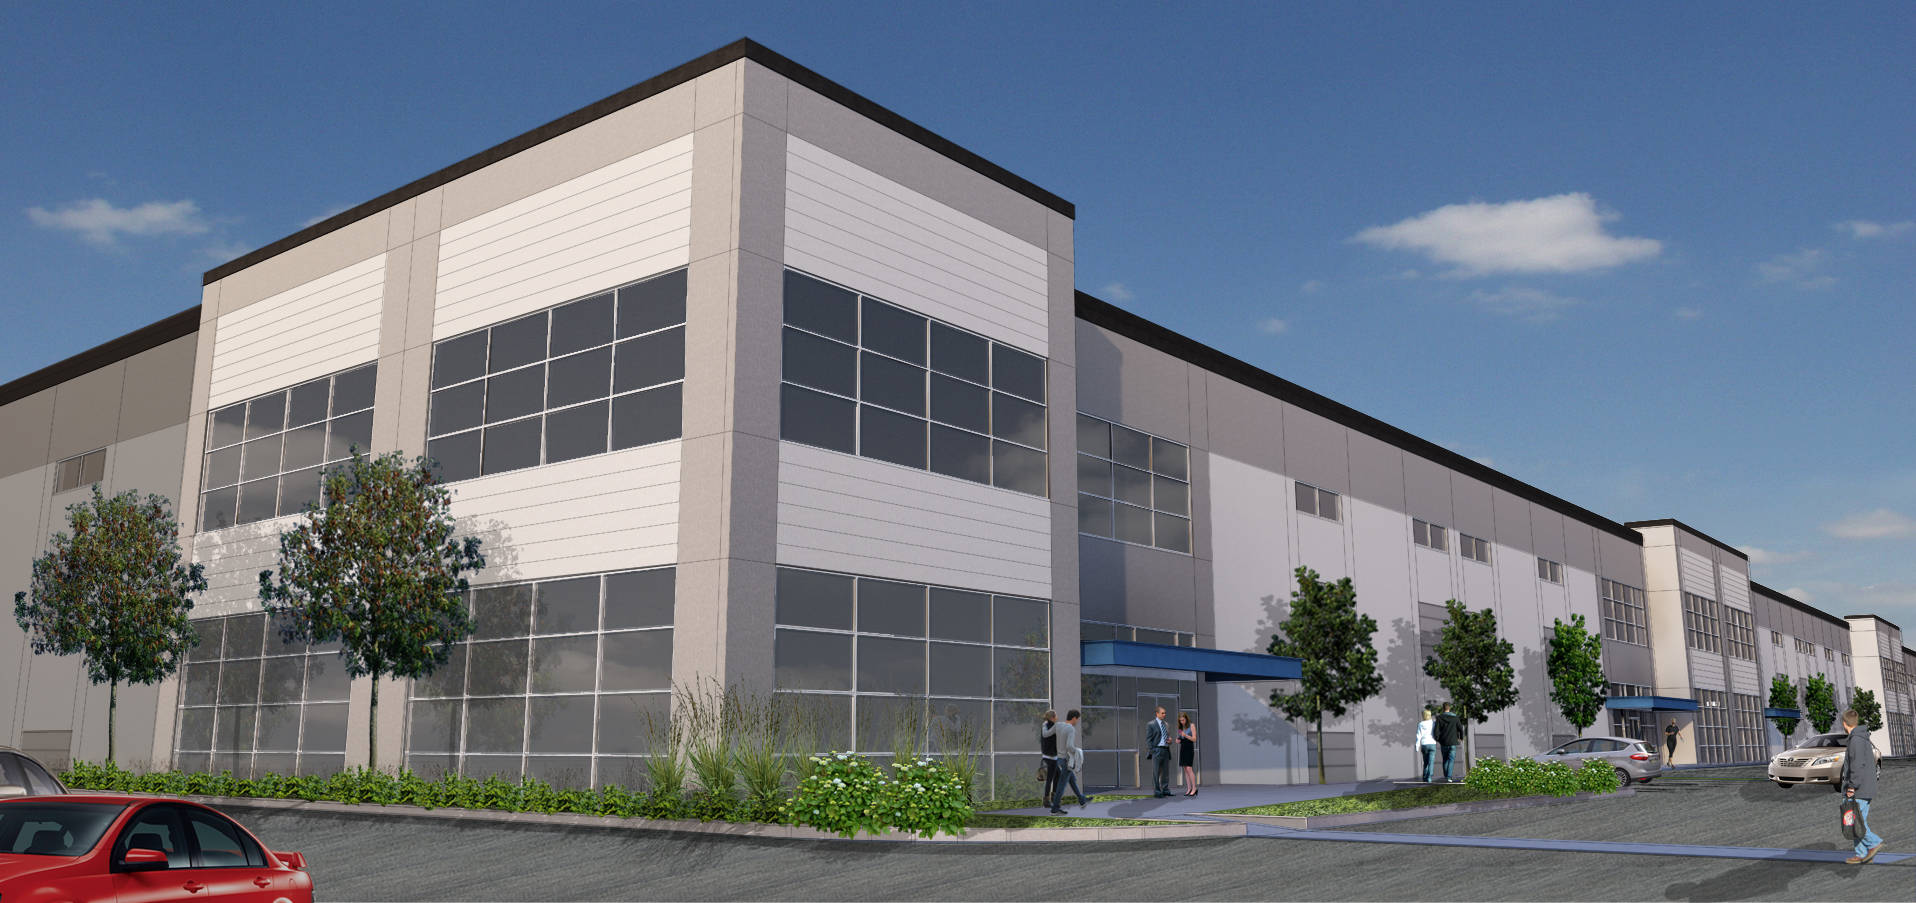 Bridge Development Partners, LLC has acquired a former Supervalu property that has been inactive for the past decade. The Auburn property is going to be reimagined into a single, 206,155-square foot flexible industrial building that will help supplement the area’s booming technology, e-commerce, and creative industries. COURTESY RENDERING, Bridge Development Partners, LLC